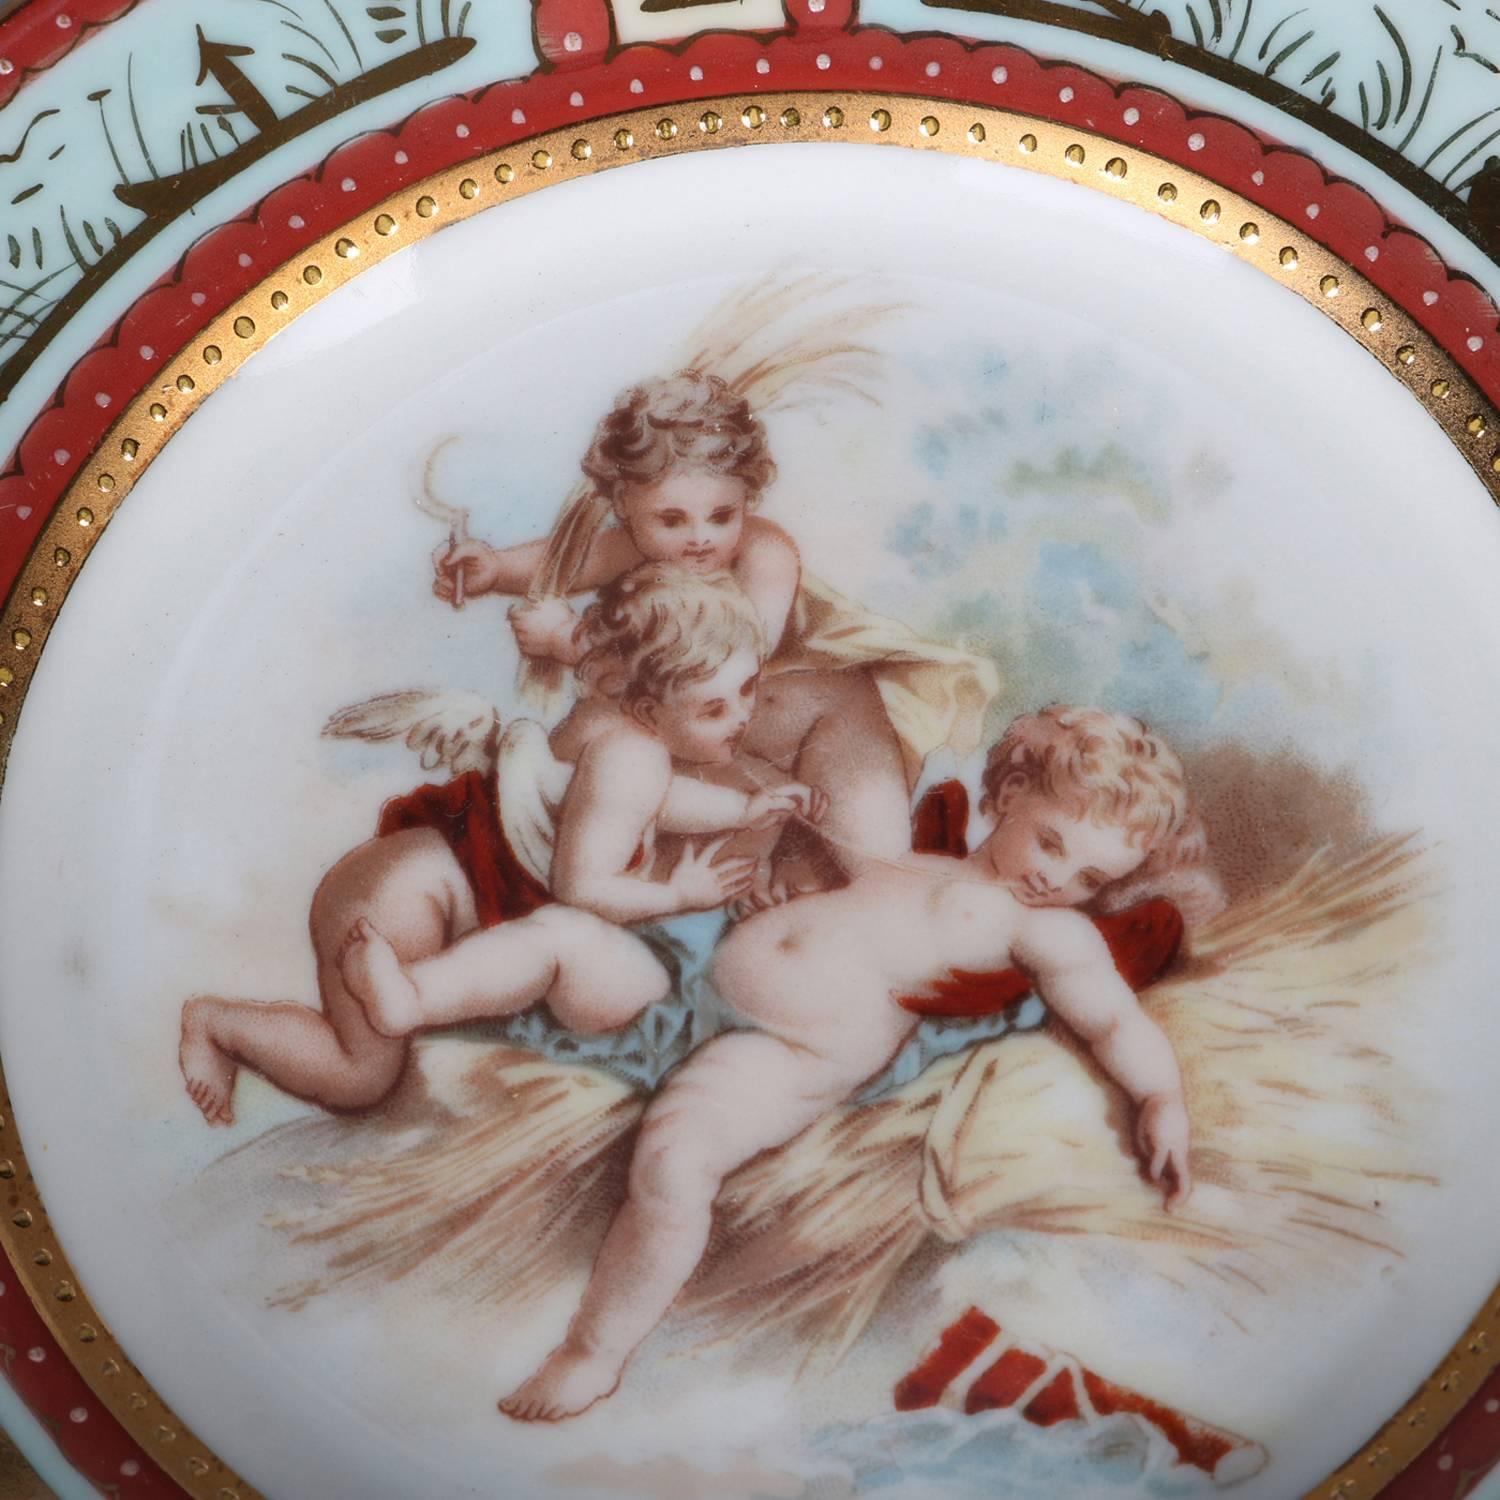 Six antique hand-painted plates by Royal Vienna feature central classical cherub scenes, borders with reserves of marsh scenes with herons and grasses including cattails, en verso blue shield or beehive mark, circa 1880.

Measure: 1